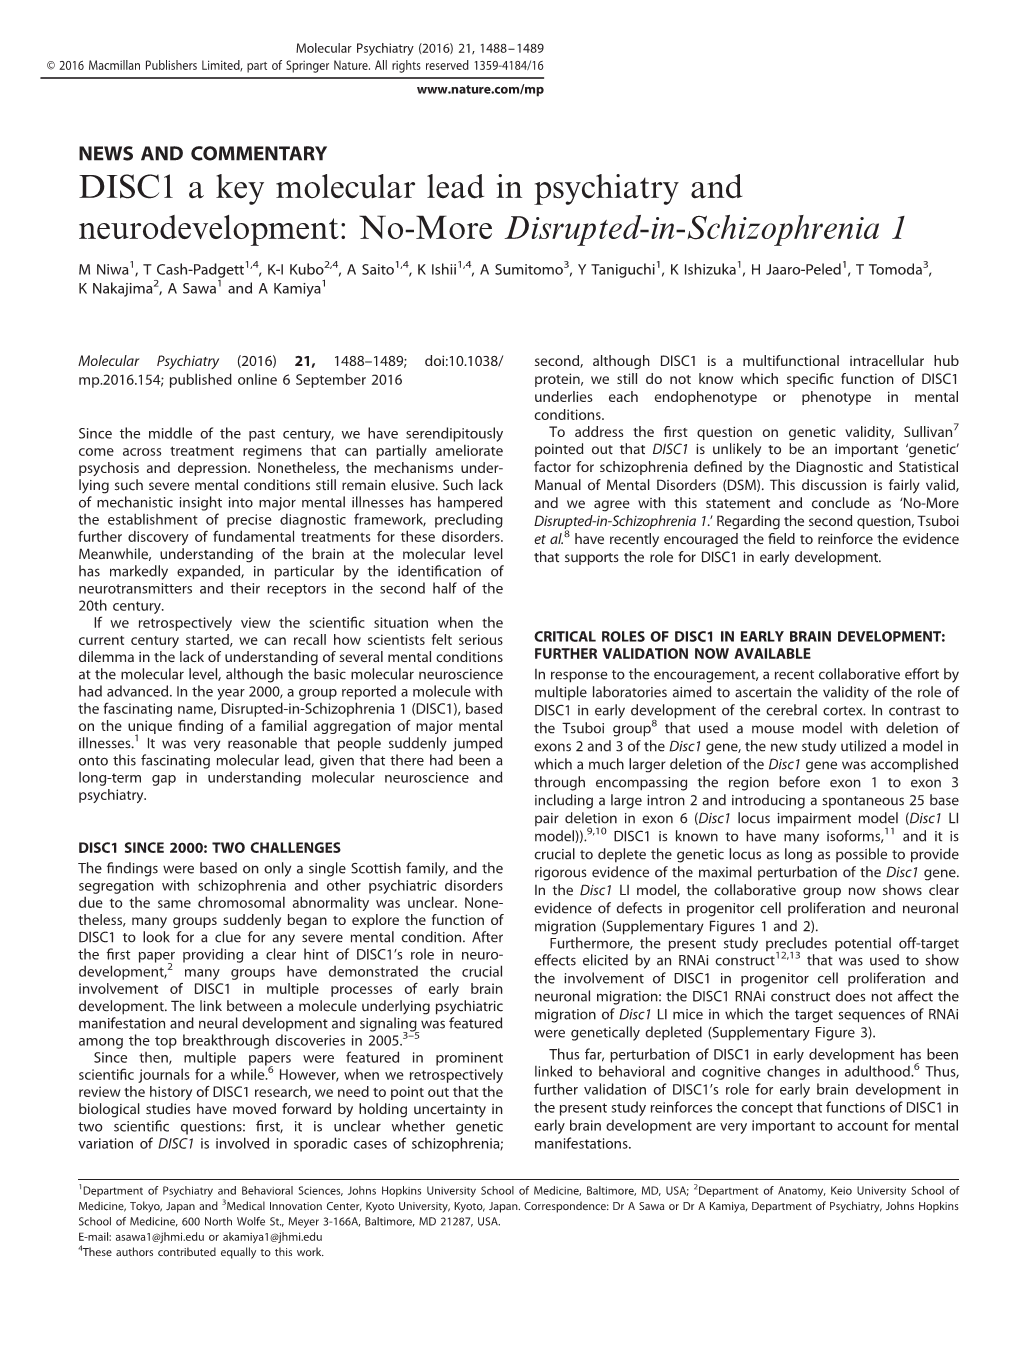 DISC1 a Key Molecular Lead in Psychiatry and Neurodevelopment: No-More Disrupted-In-Schizophrenia 1